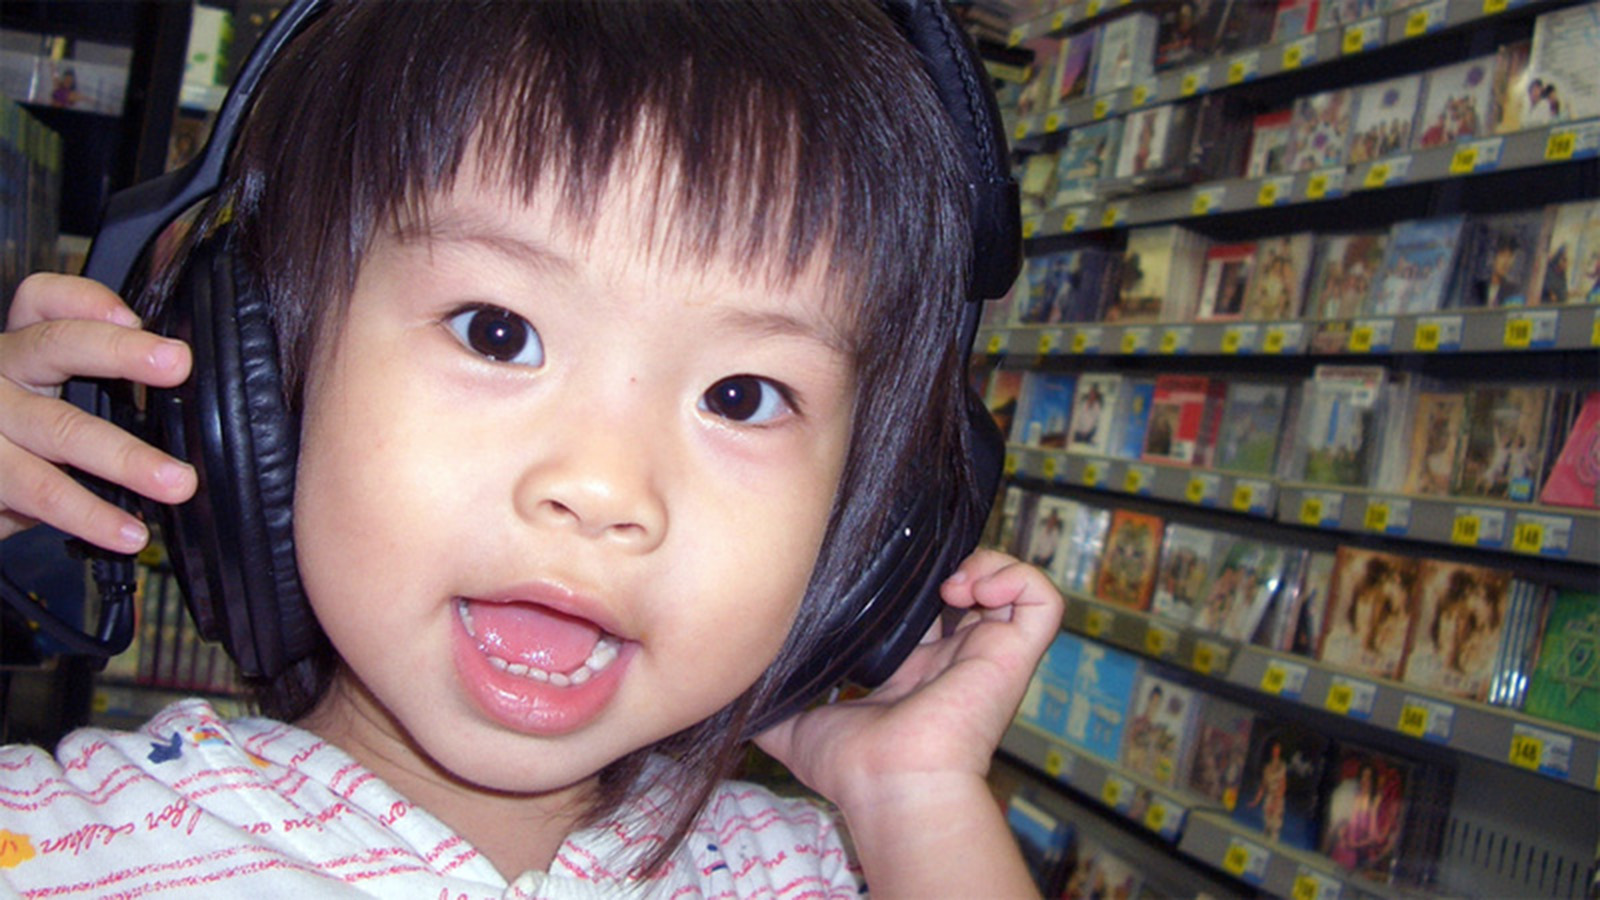 A photo of a child wearing headphones while standing next to a wall of CDs.